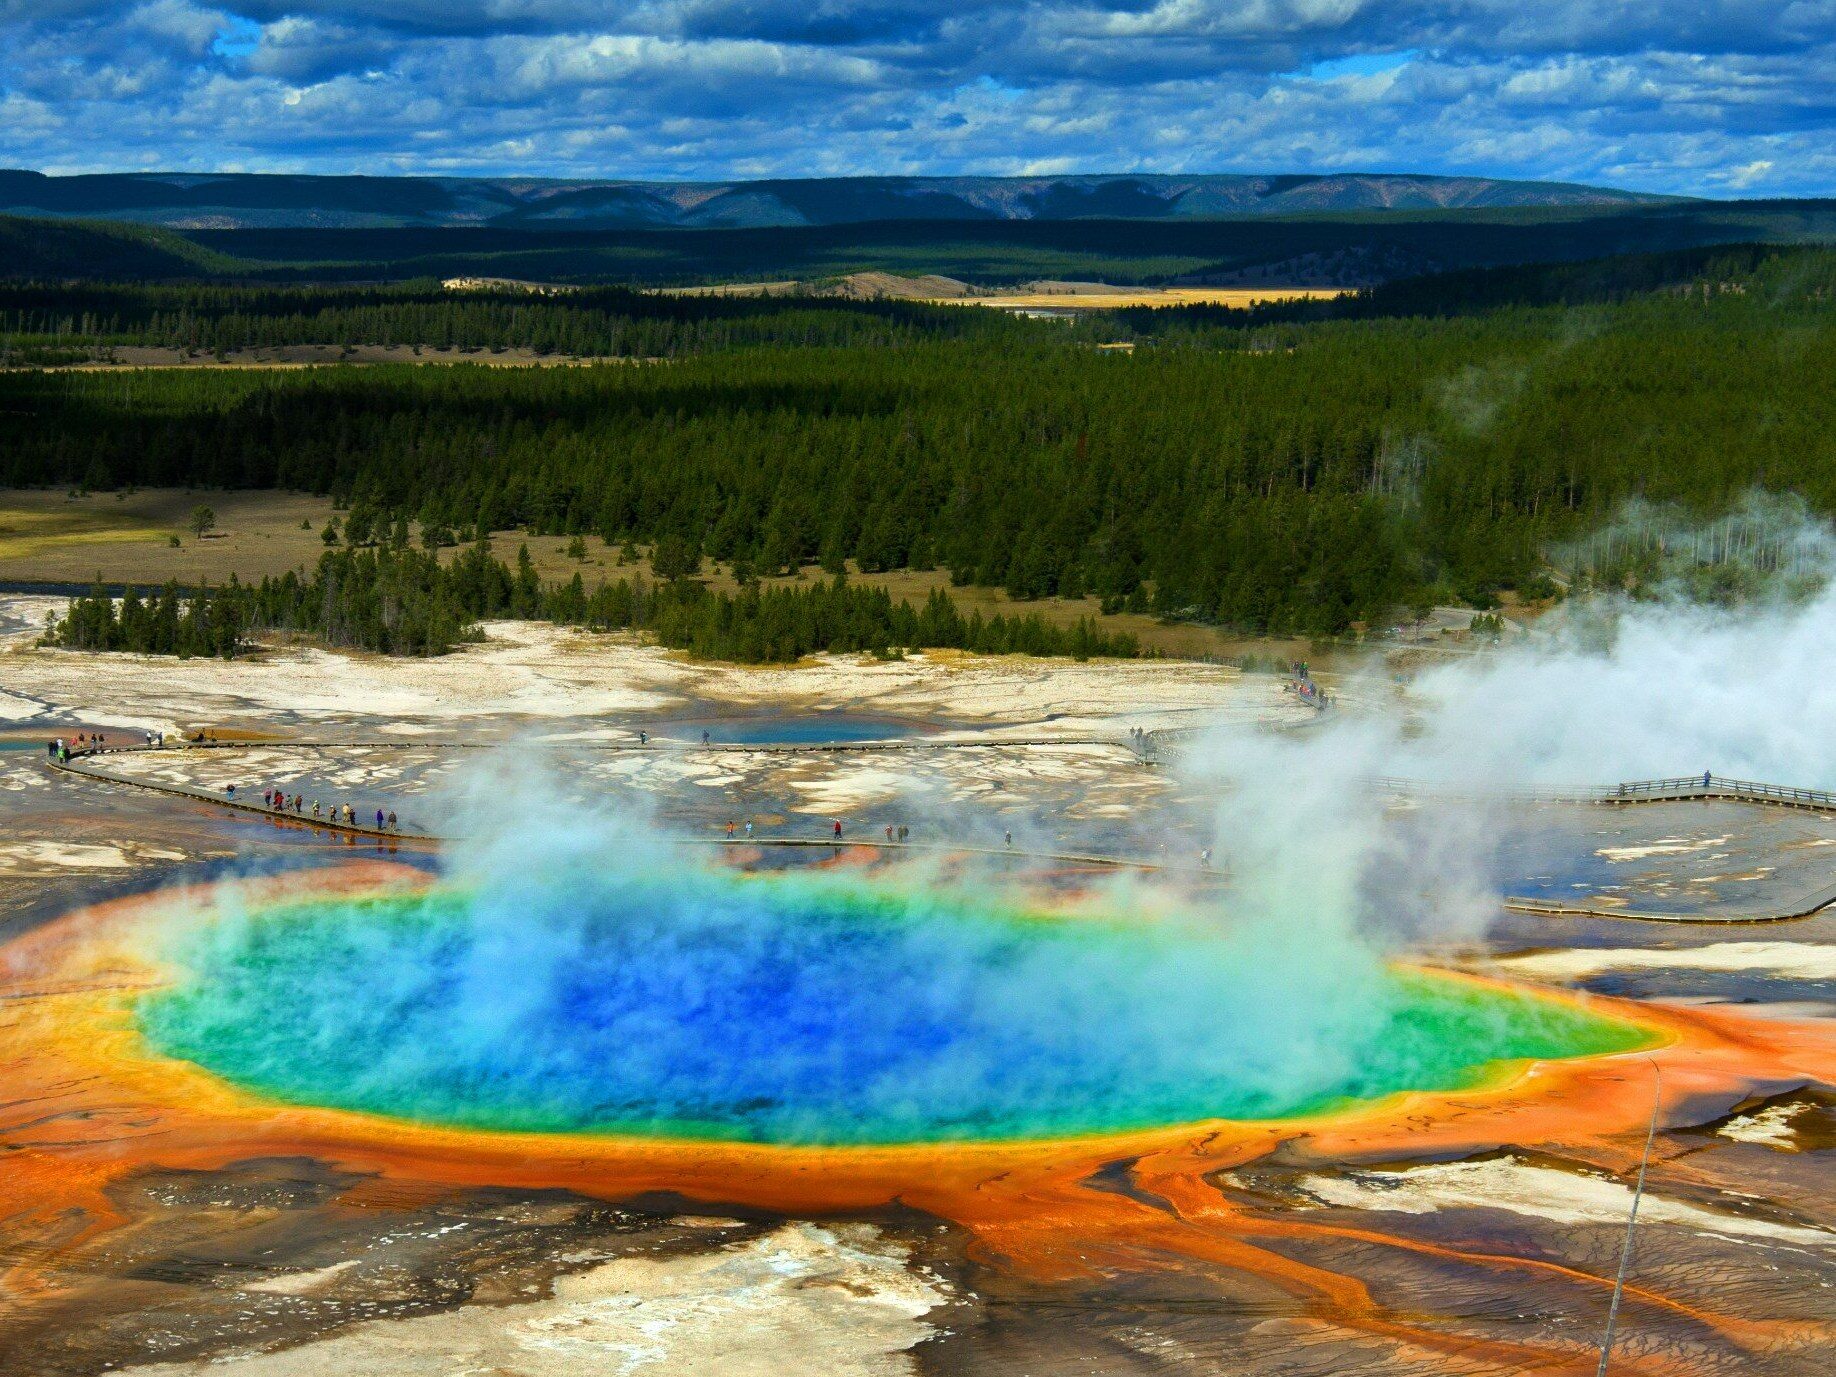 This is the oldest national park located on a supervolcano.  What to see in Yellowstone?